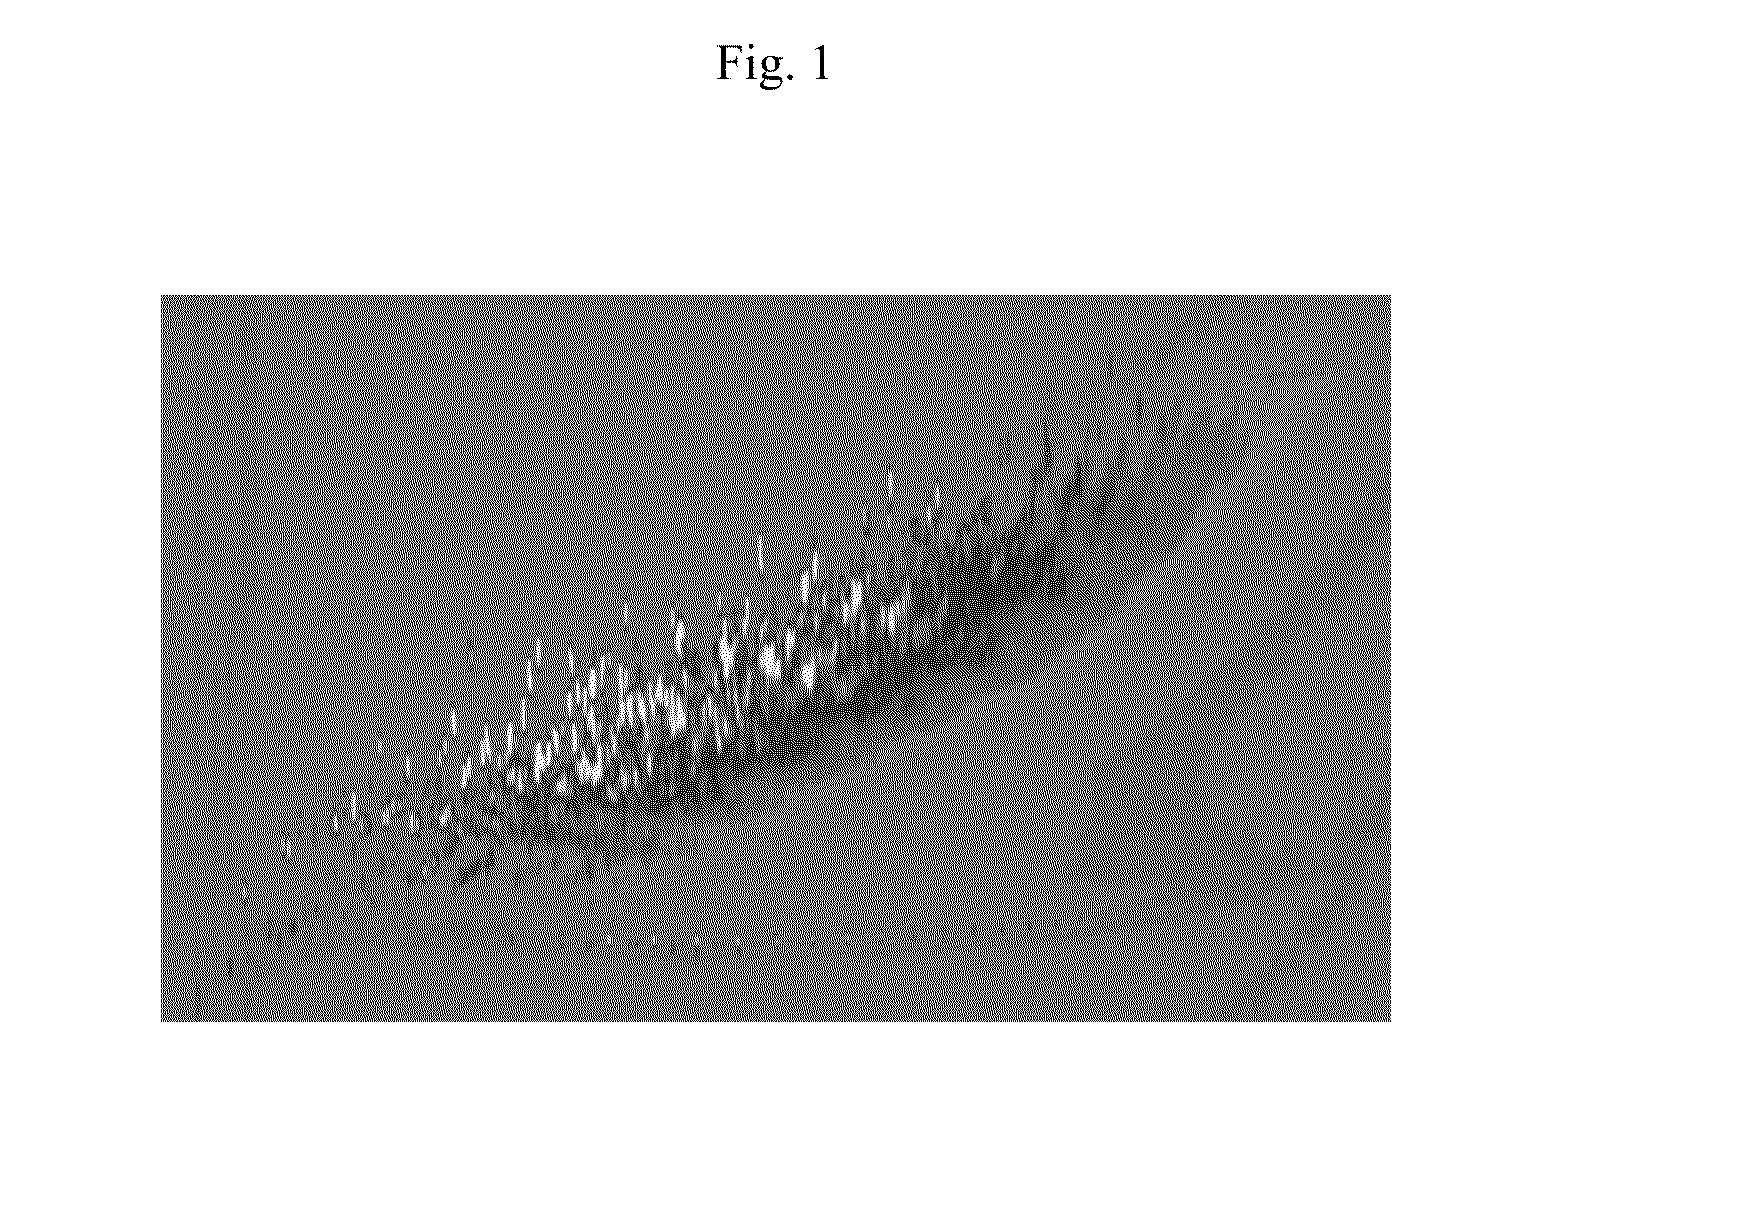 Hydrotreated hydrocarbon tar, fuel oil composition,
and process for making